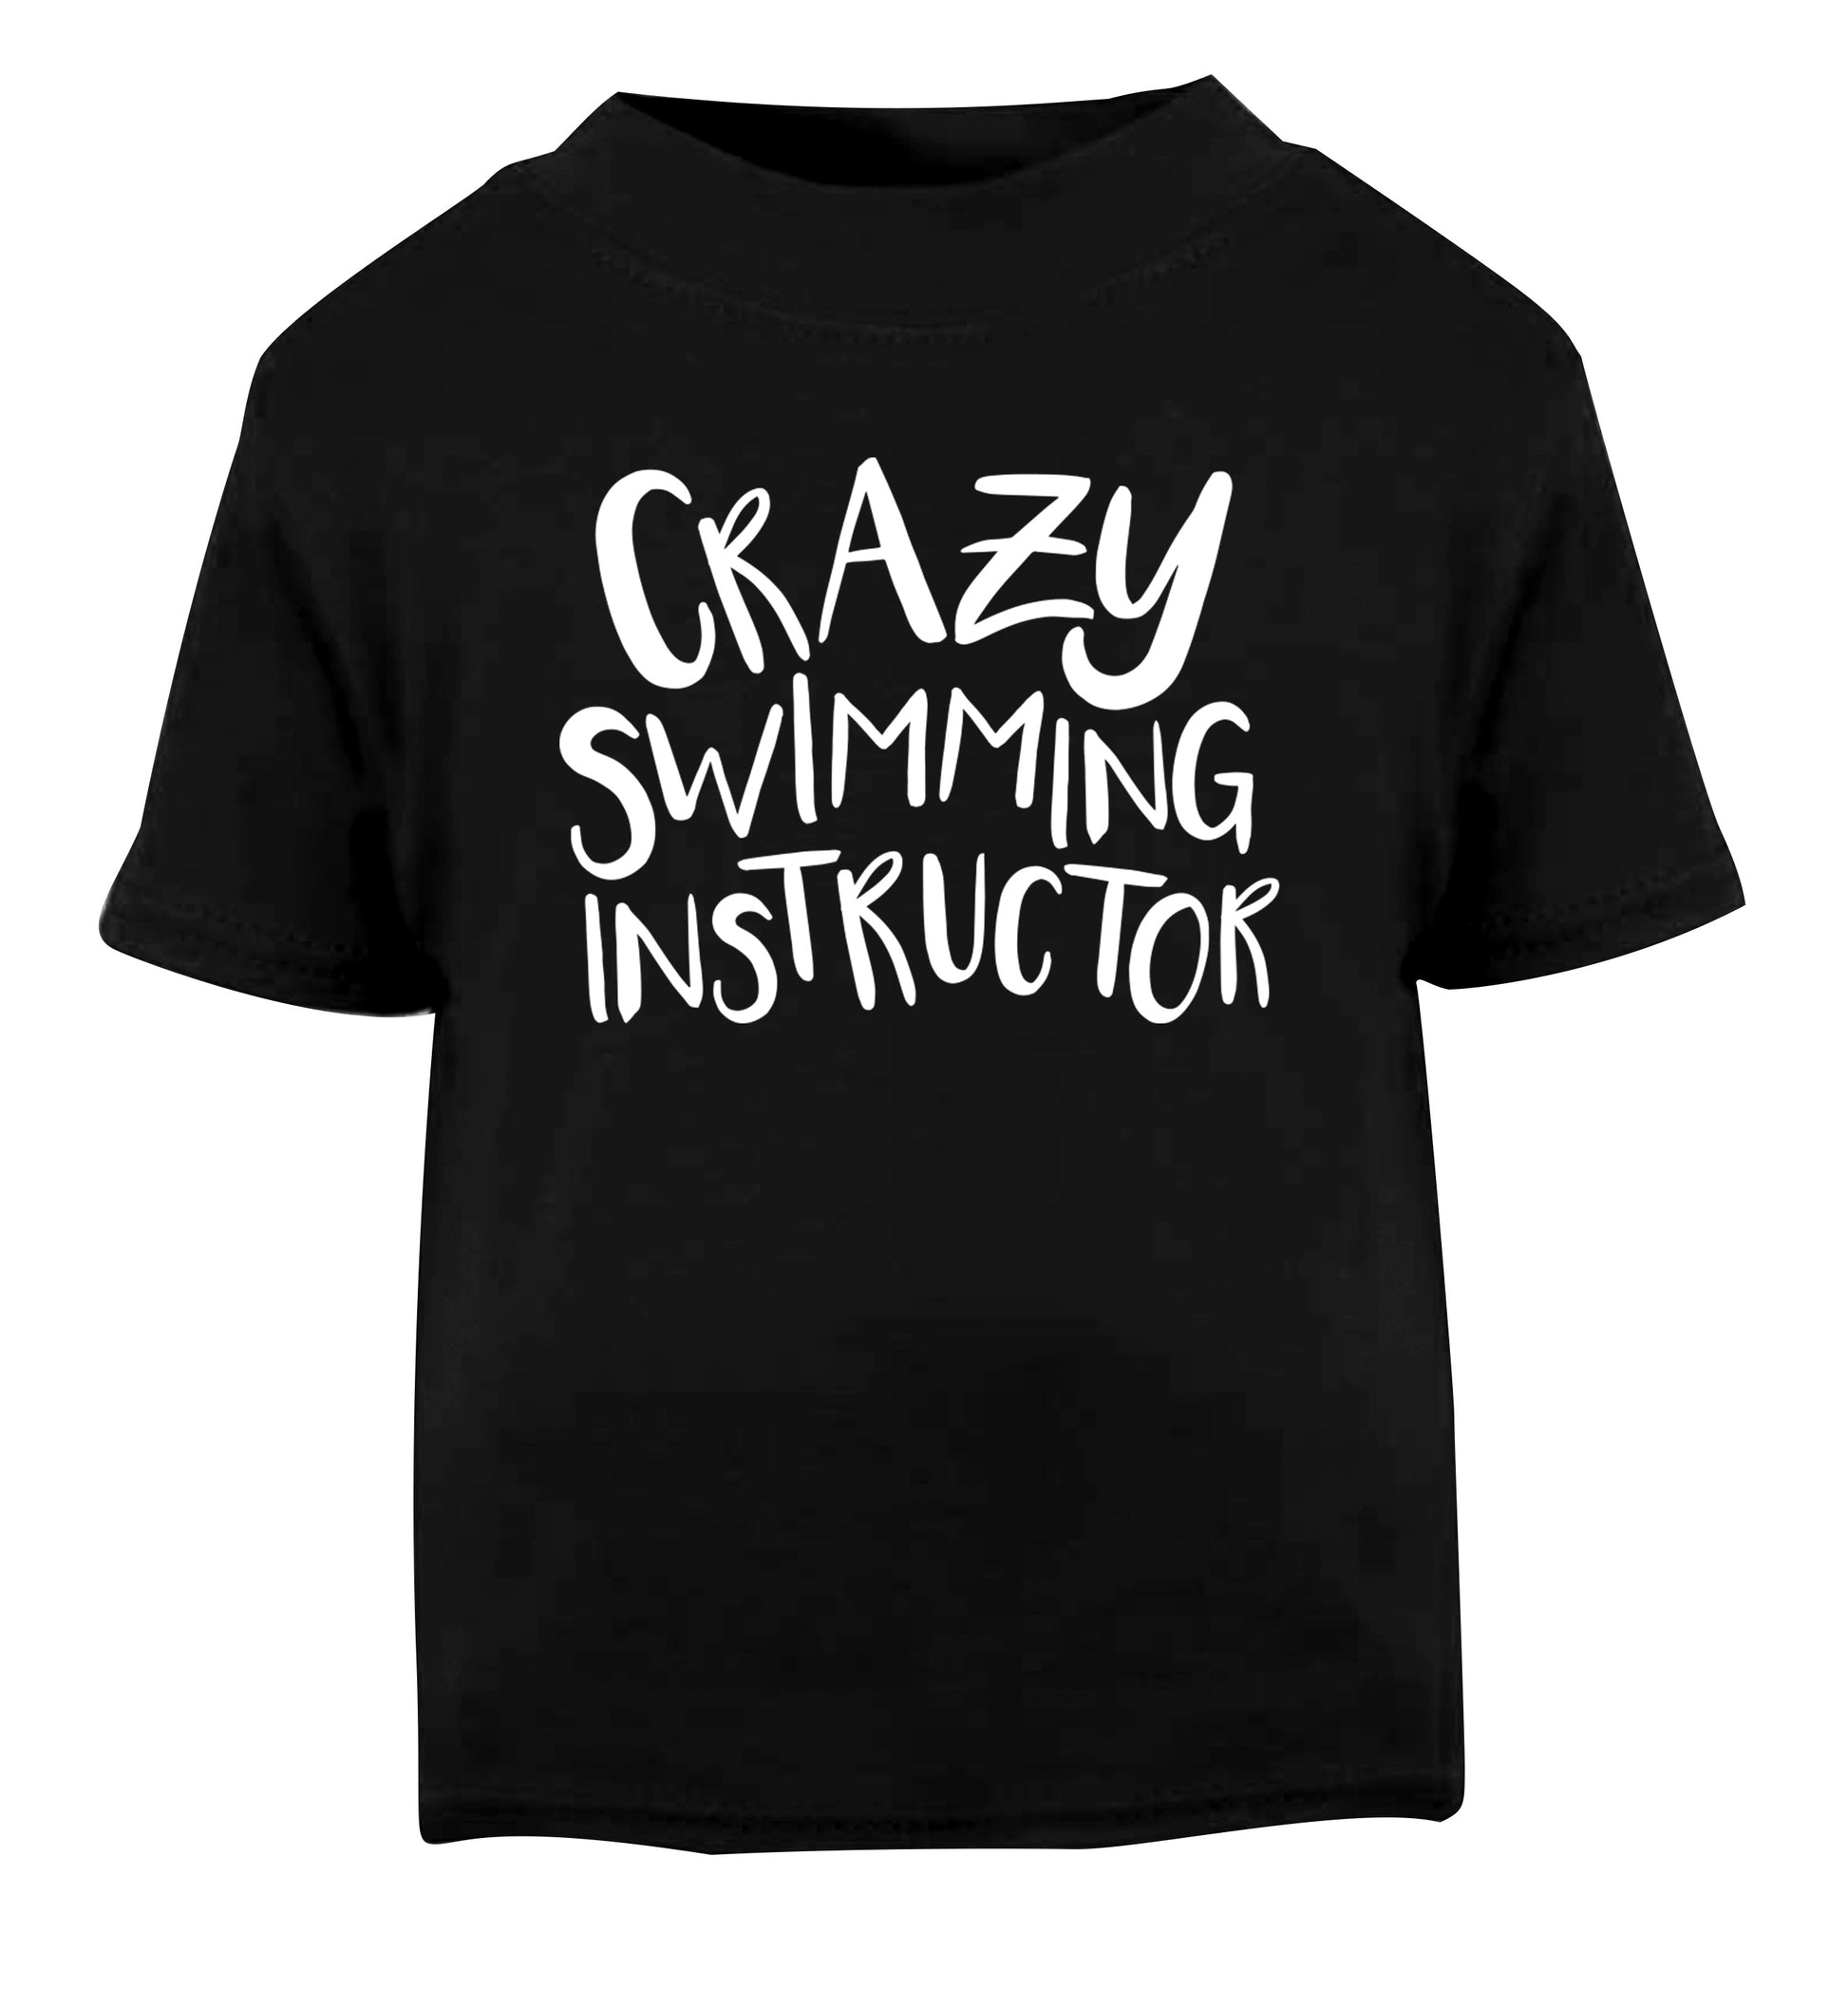 Crazy swimming instructor Black Baby Toddler Tshirt 2 years